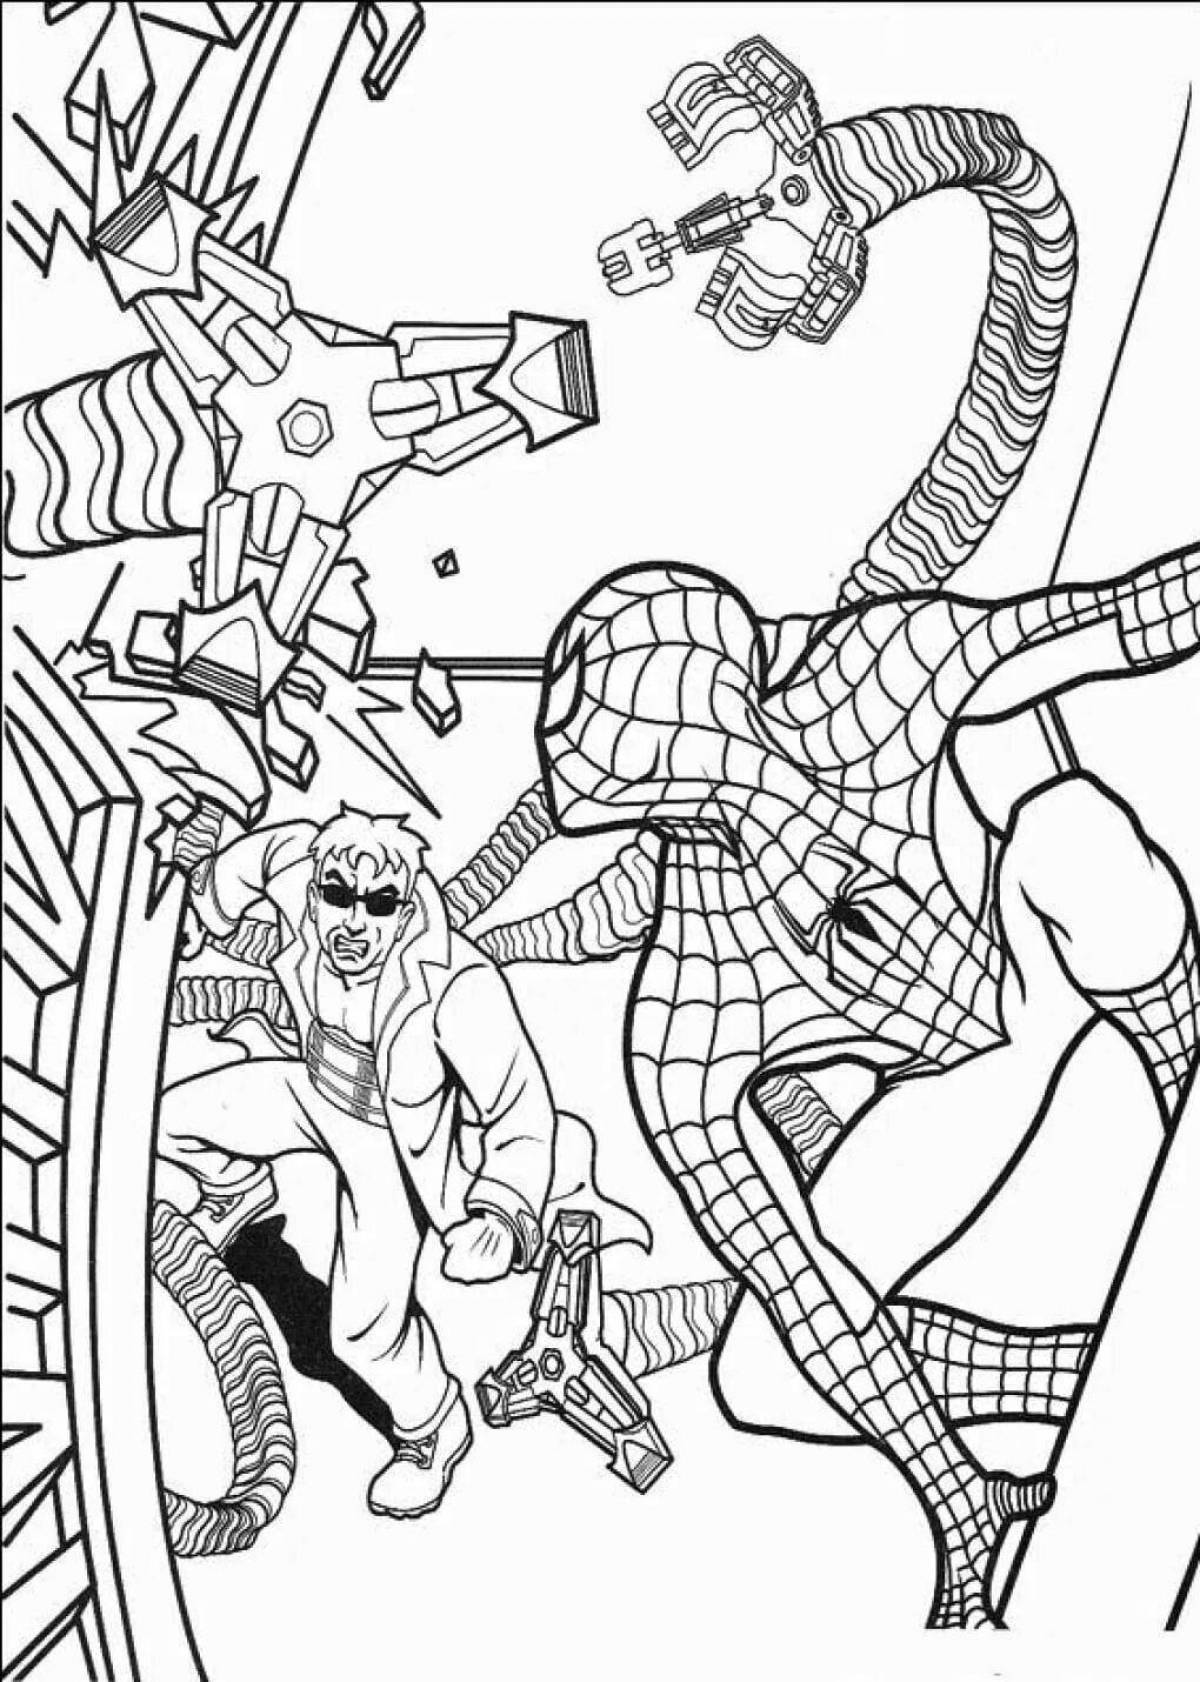 Spider-Man Christmas coloring book